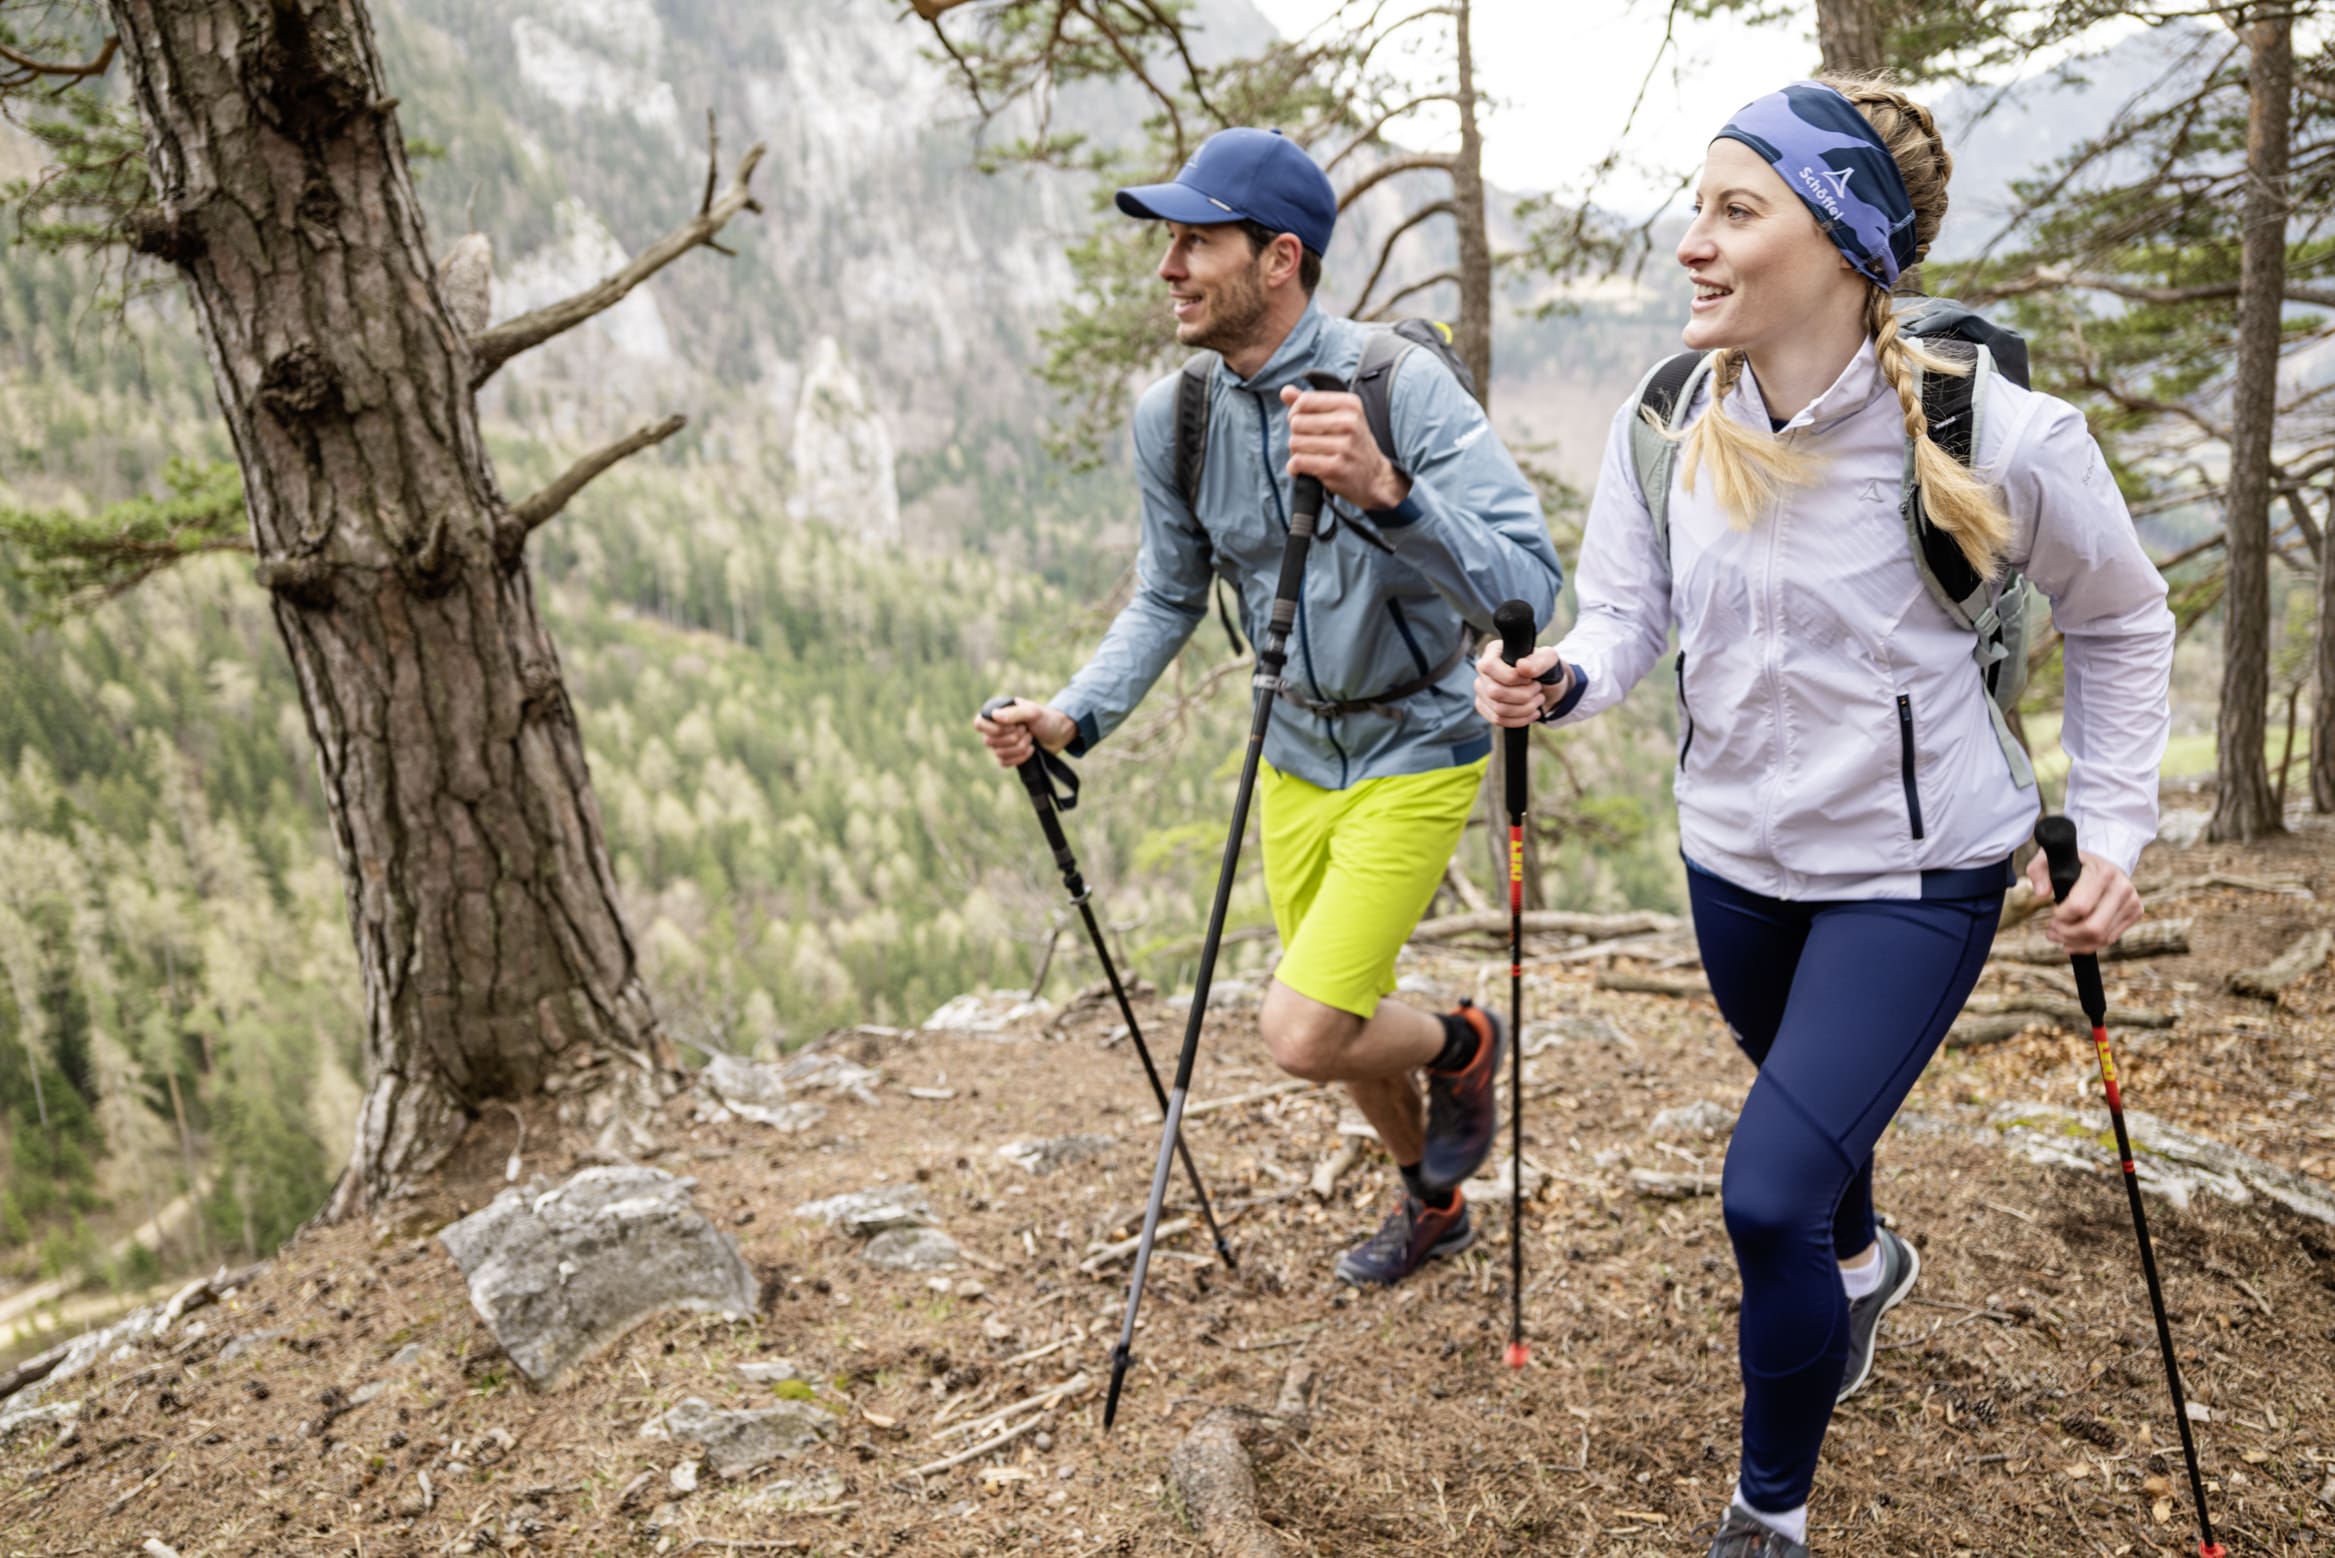 Stay Cool On The Trail: Clothing and Gear for Hot Weather Hiking